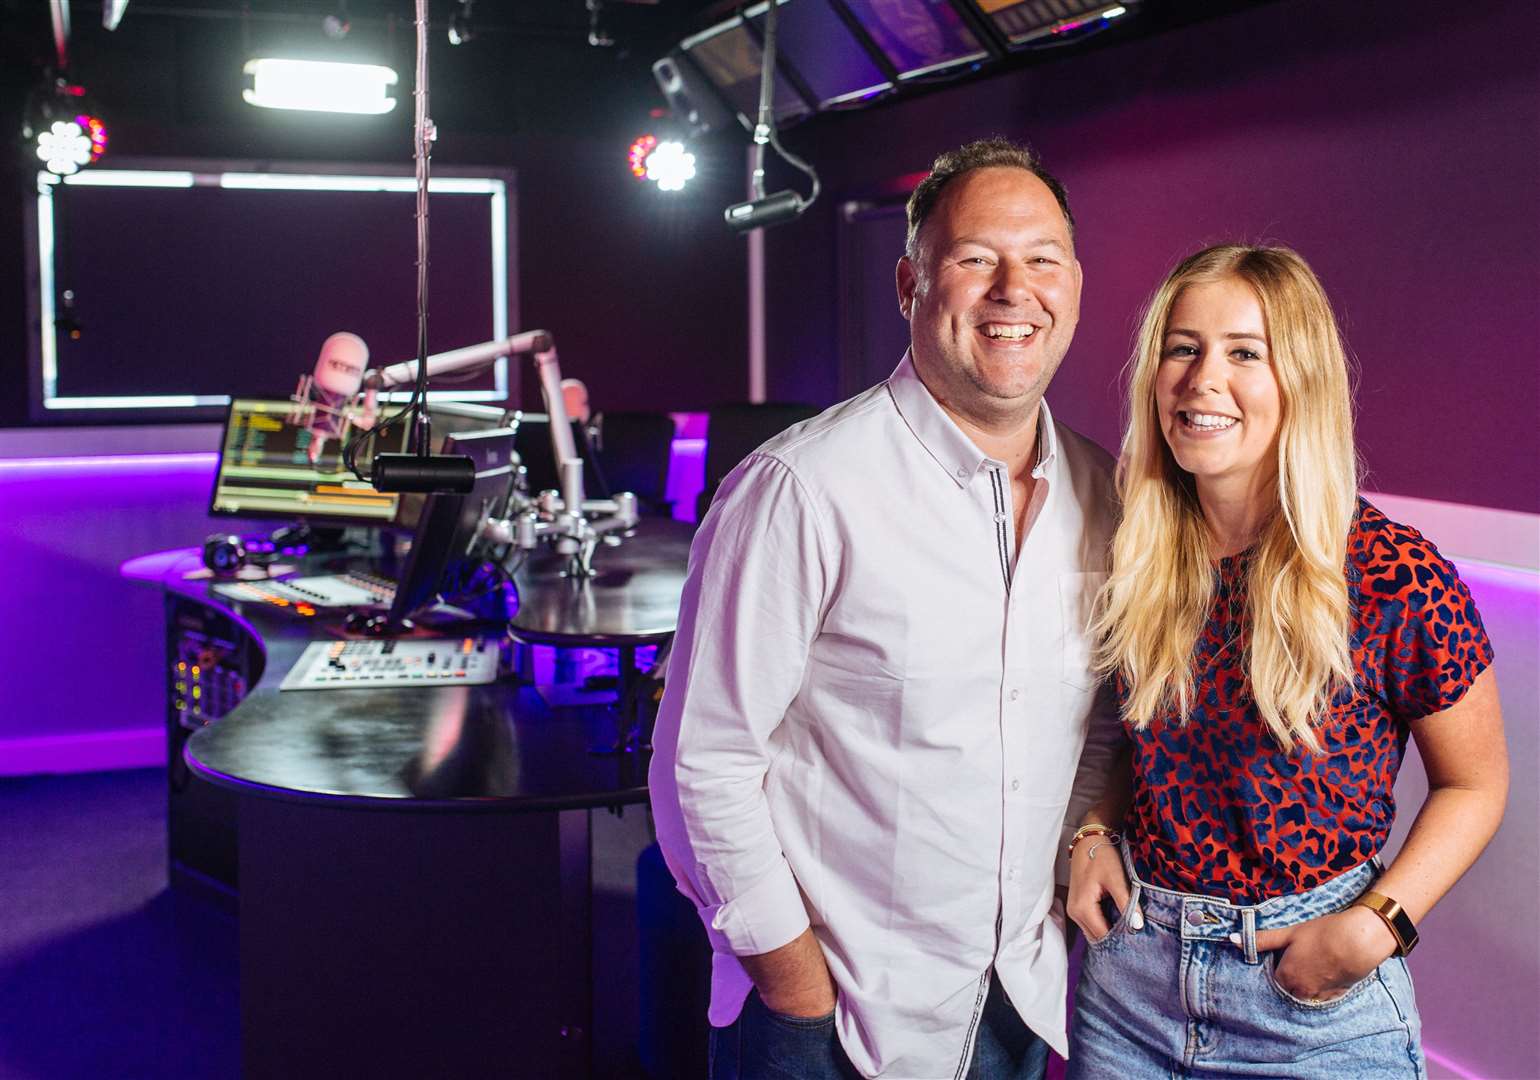 Garry and Laura from kmfm Breakfast